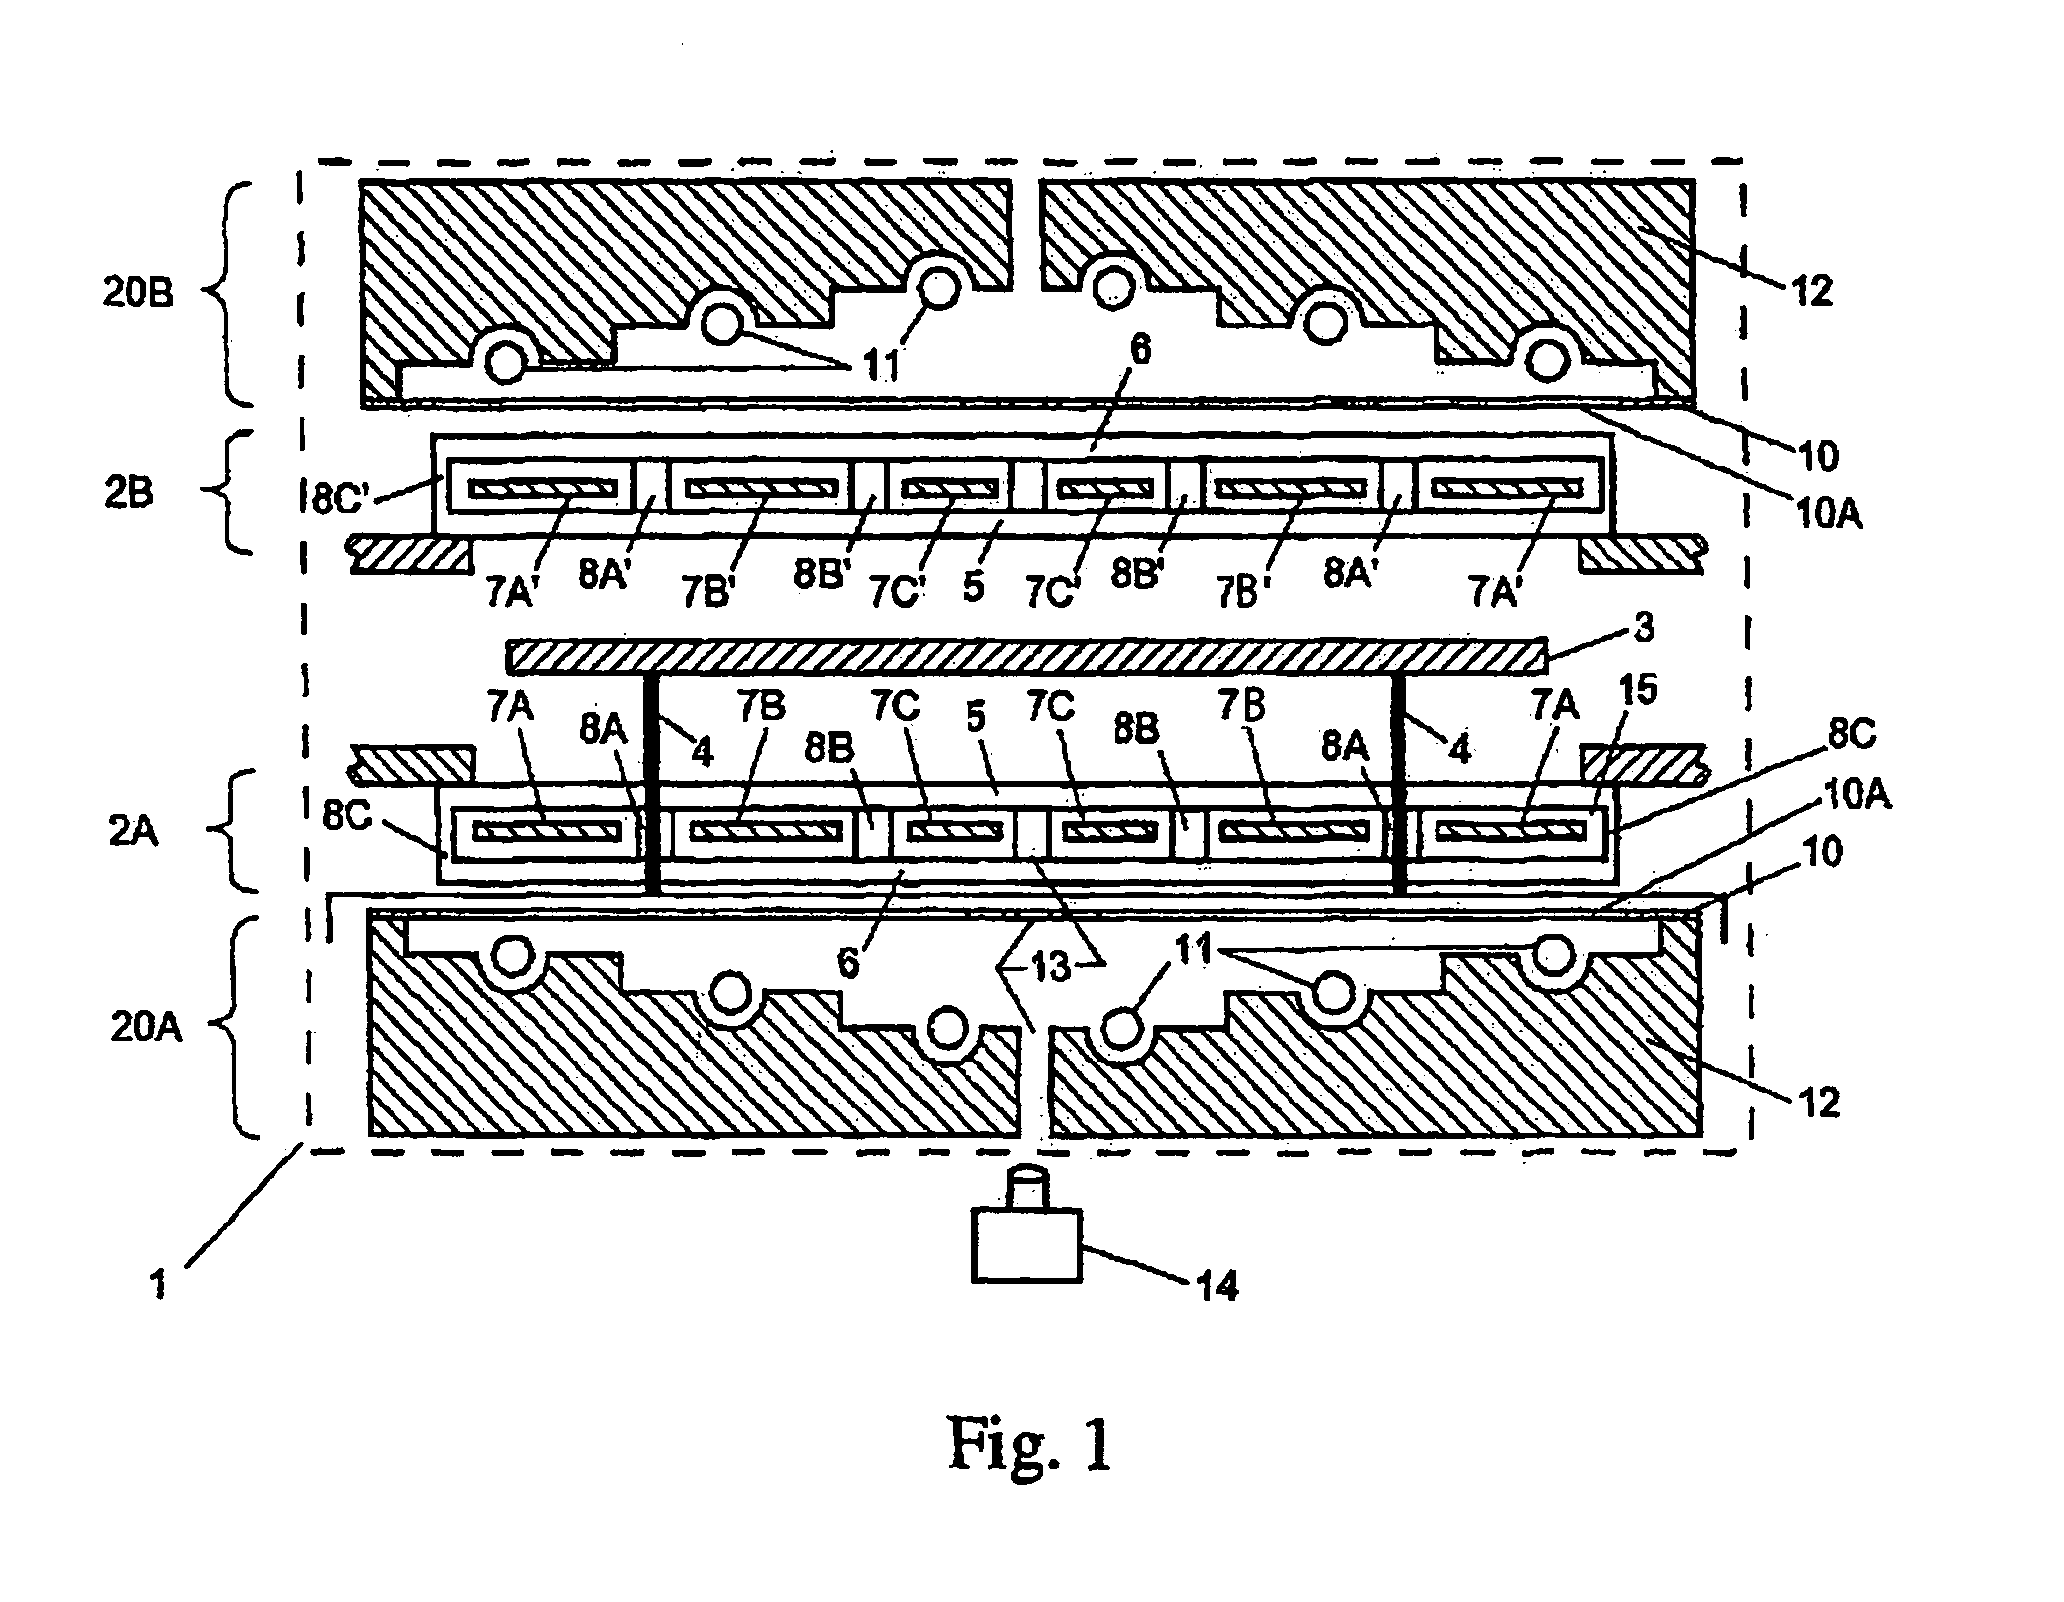 Rapid thermal processing lamp and method for manufacturing the same